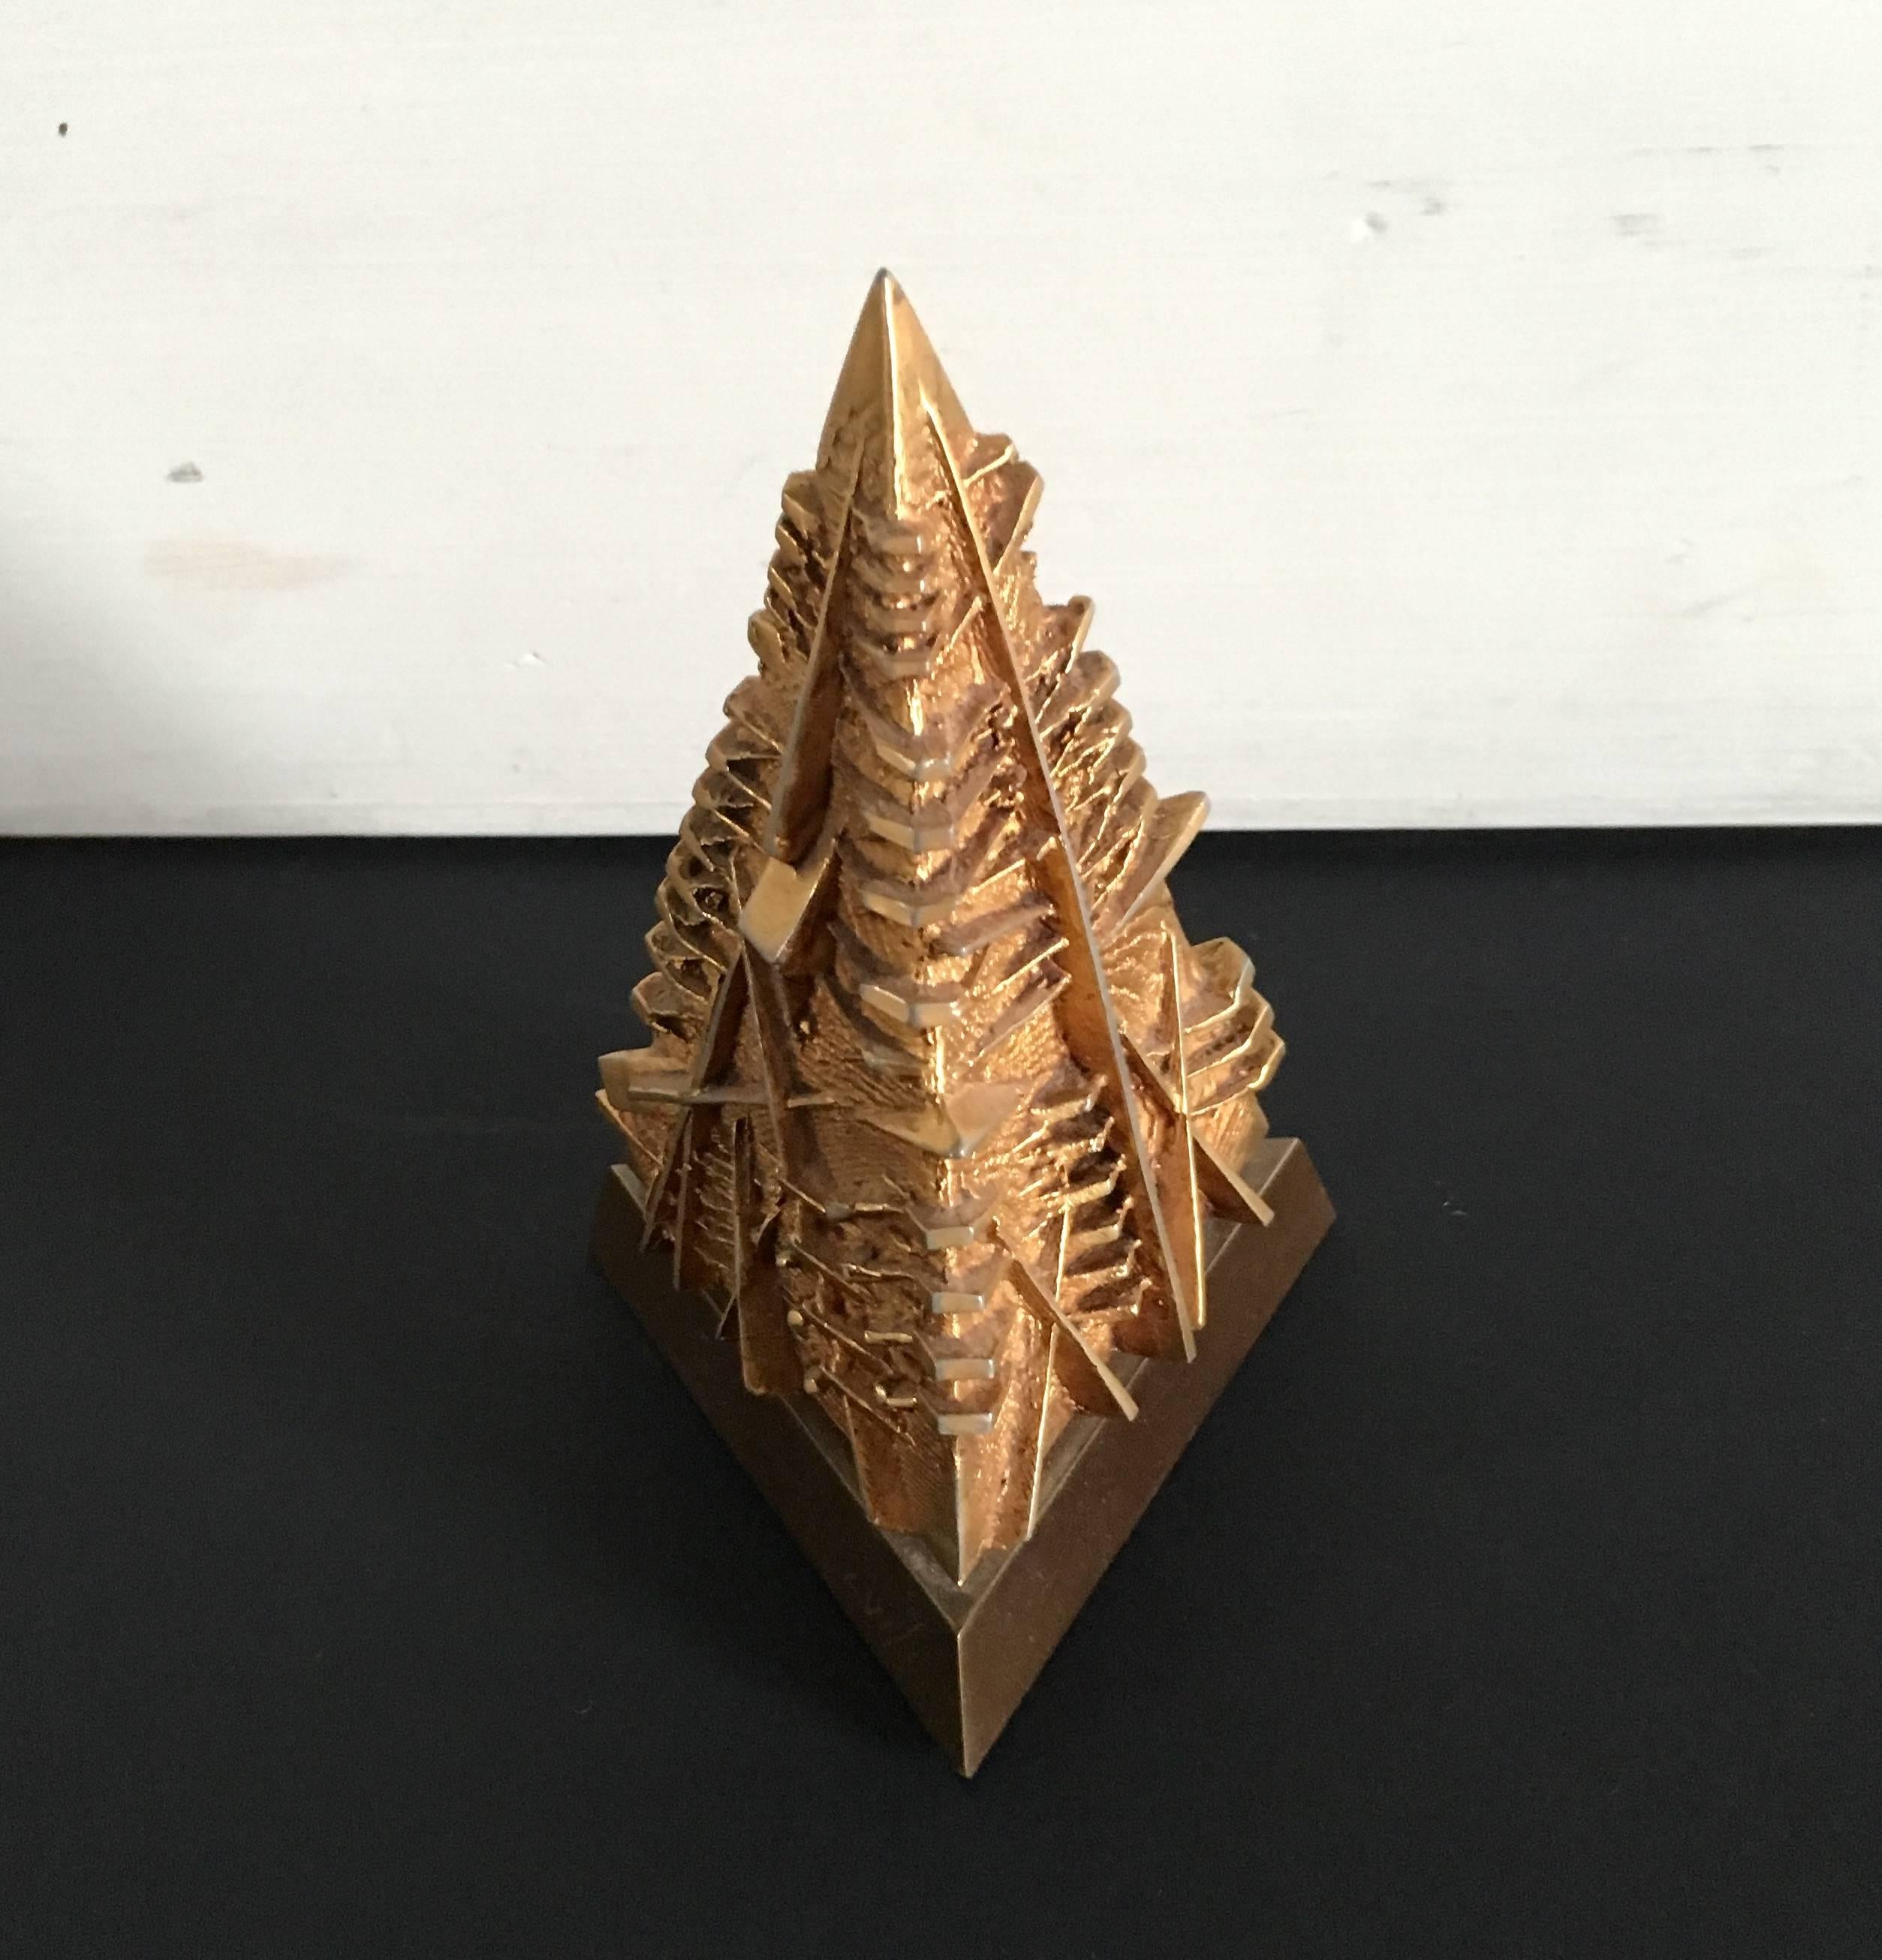 Arnaldo Pomodoro ,sculpture Piramide bronze with gold patina 
size 15 x 9.5 x 9.5 cm 
Arnaldo Pomodoro (born 23 June 1926) is an Italian sculptor. He was born in Morciano, Romagna, Italy. He currently lives and works in Milan
Pomodoro designed a